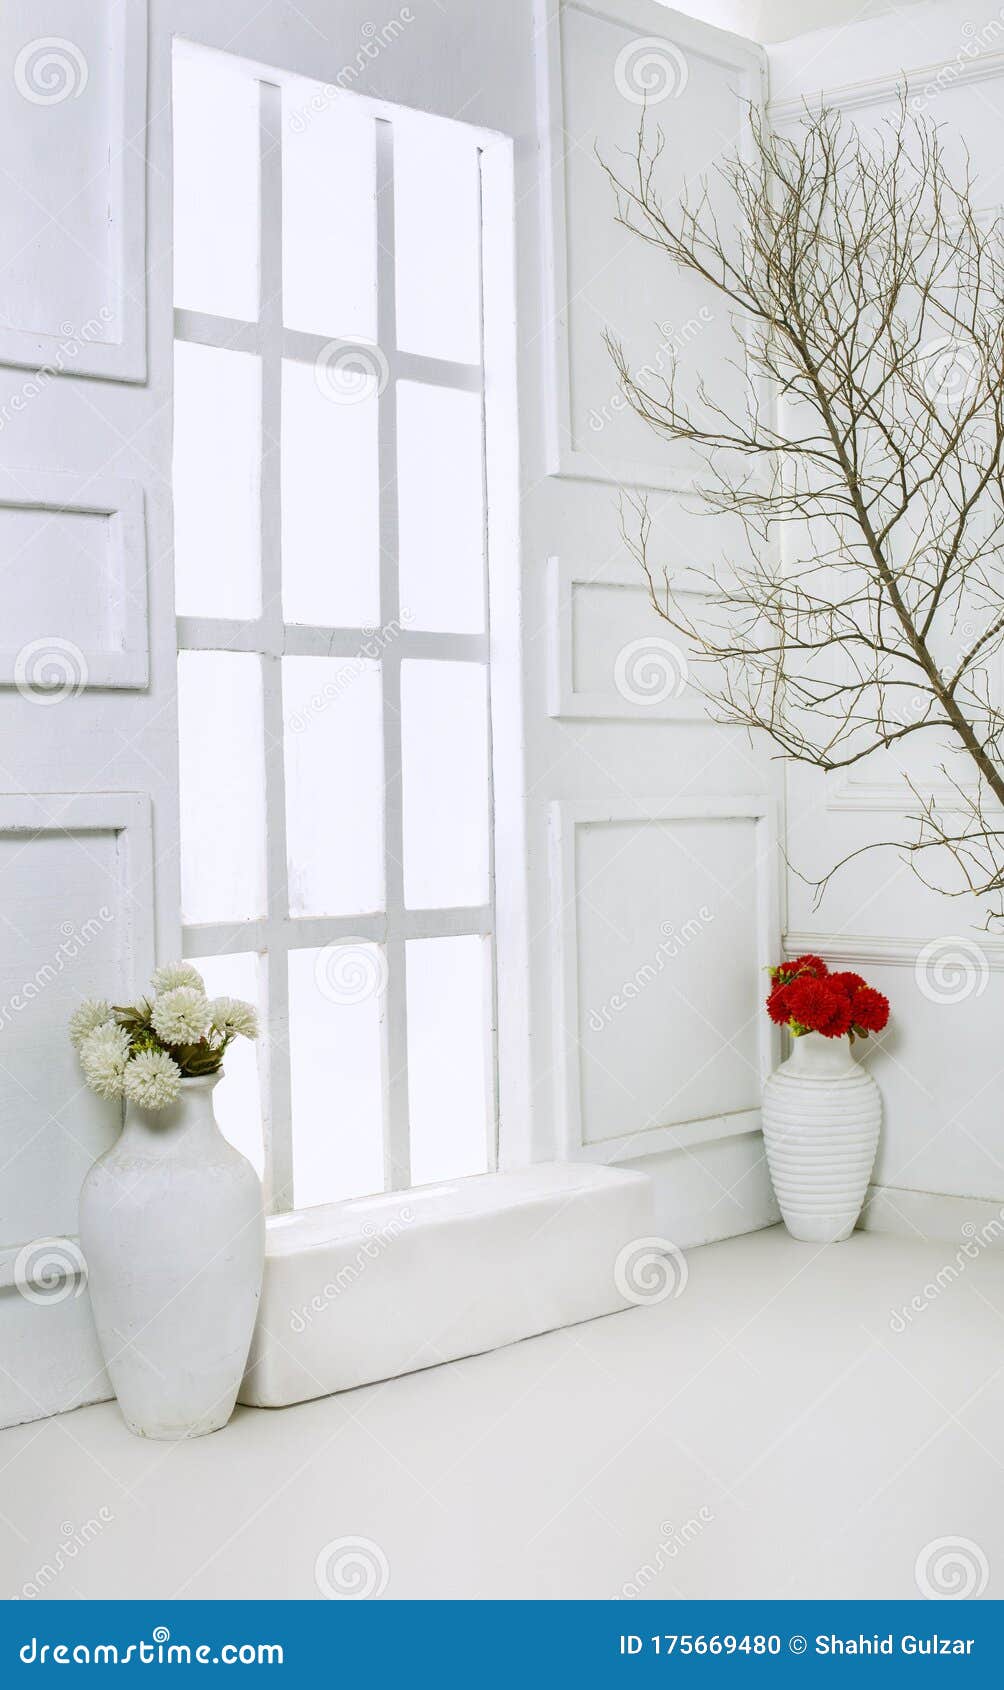 Natural Light and Airy Corner of Living Room Indoor Wallpaper Photography  Background Stock Illustration - Illustration of airy, background: 175669480